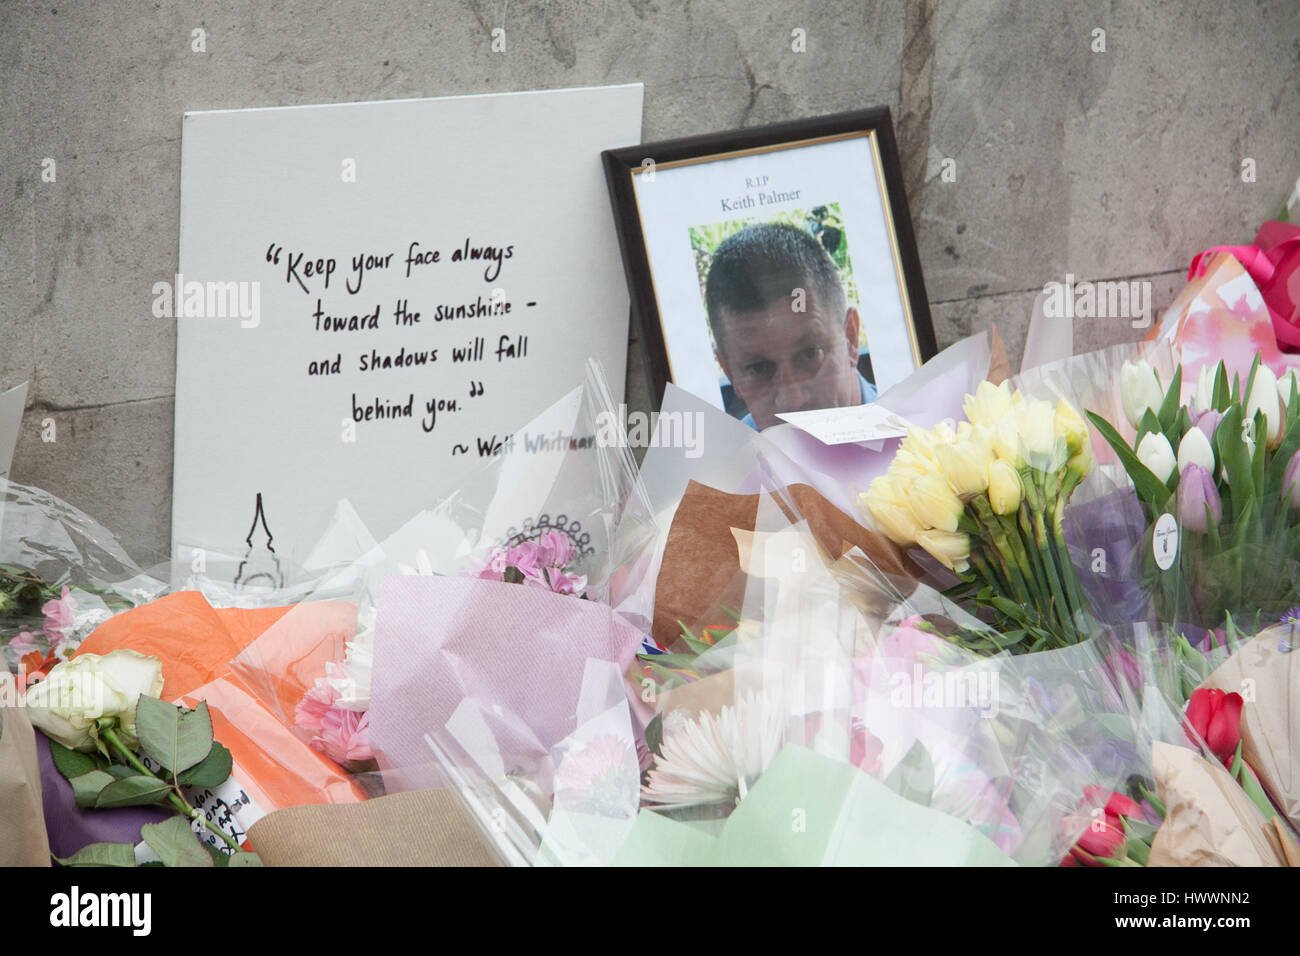 London UK.  24th March 2017. Floral tributes are placed around the picture of PC Keith Palmer by members of the public on Westminster Bridge after the terror attacks in Parliament Credit: amer ghazzal/Alamy Live News Stock Photo